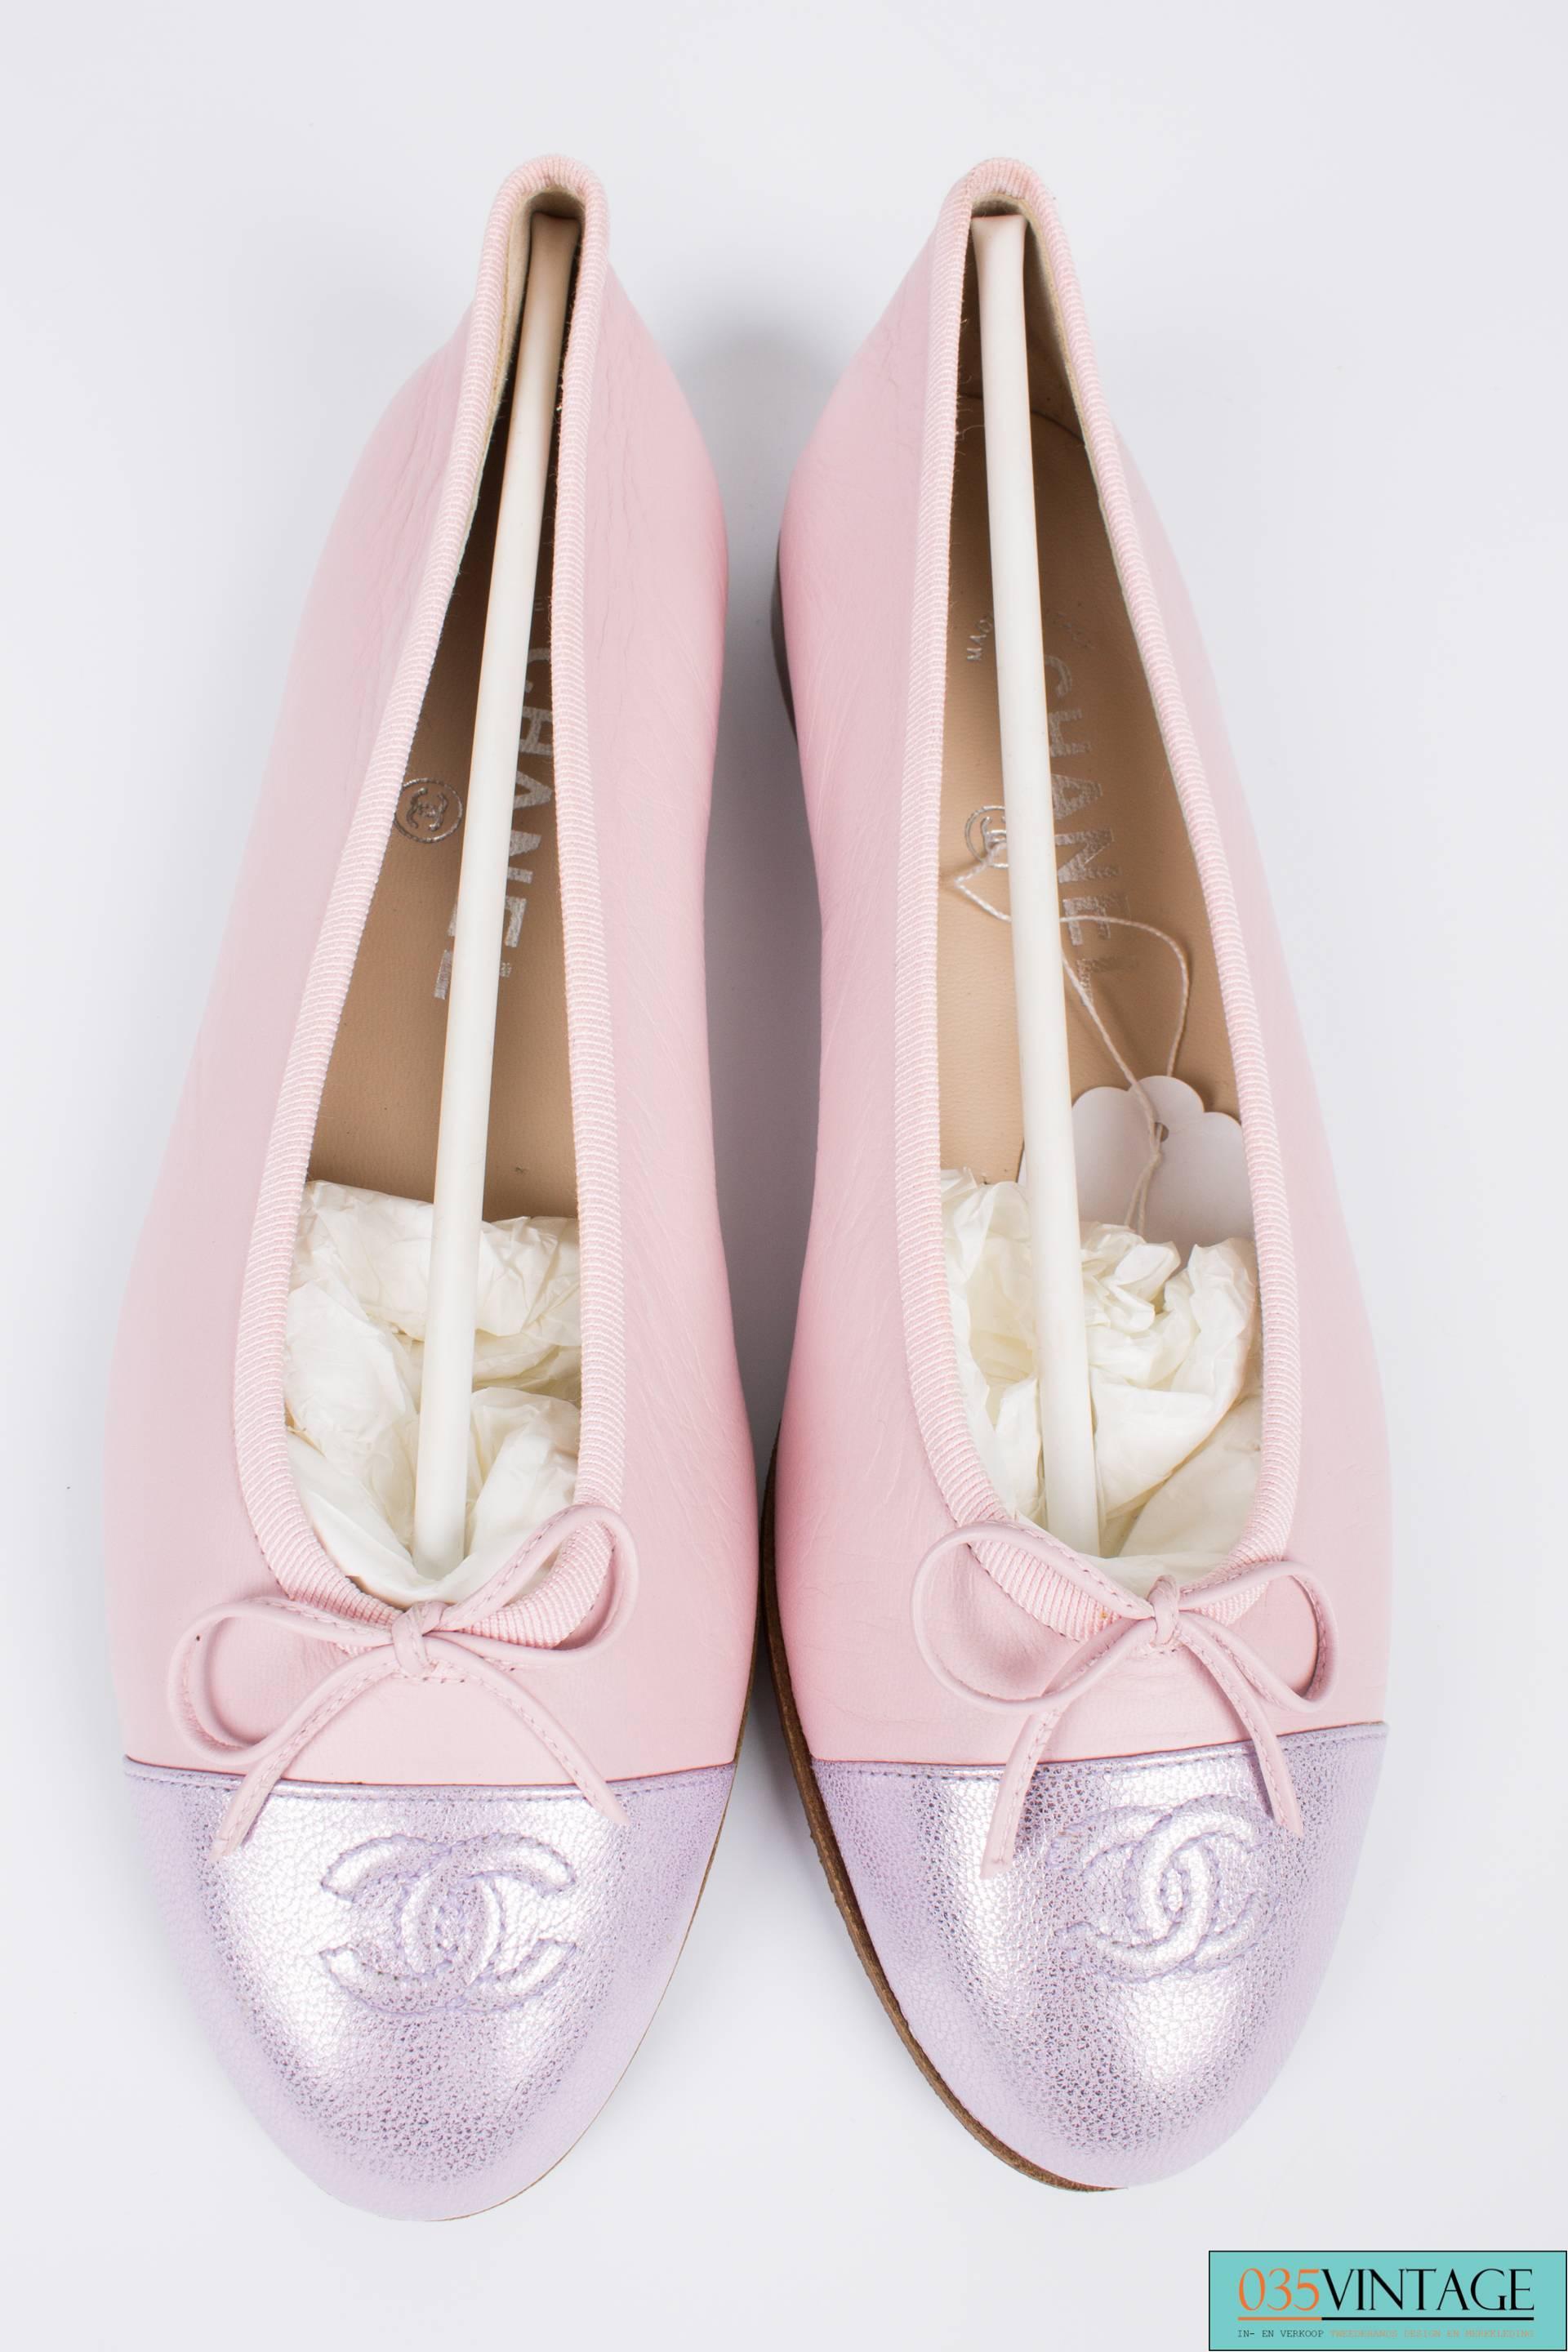 Everyone knows these beauties! Flats by Chanel with a bow and a colored toe; these ones are pink and metallic pink. 

On the colored toe of the ballerina an interlocking CC-logo is embossed. Lined with natural colored leather, a silver CHANEL logo